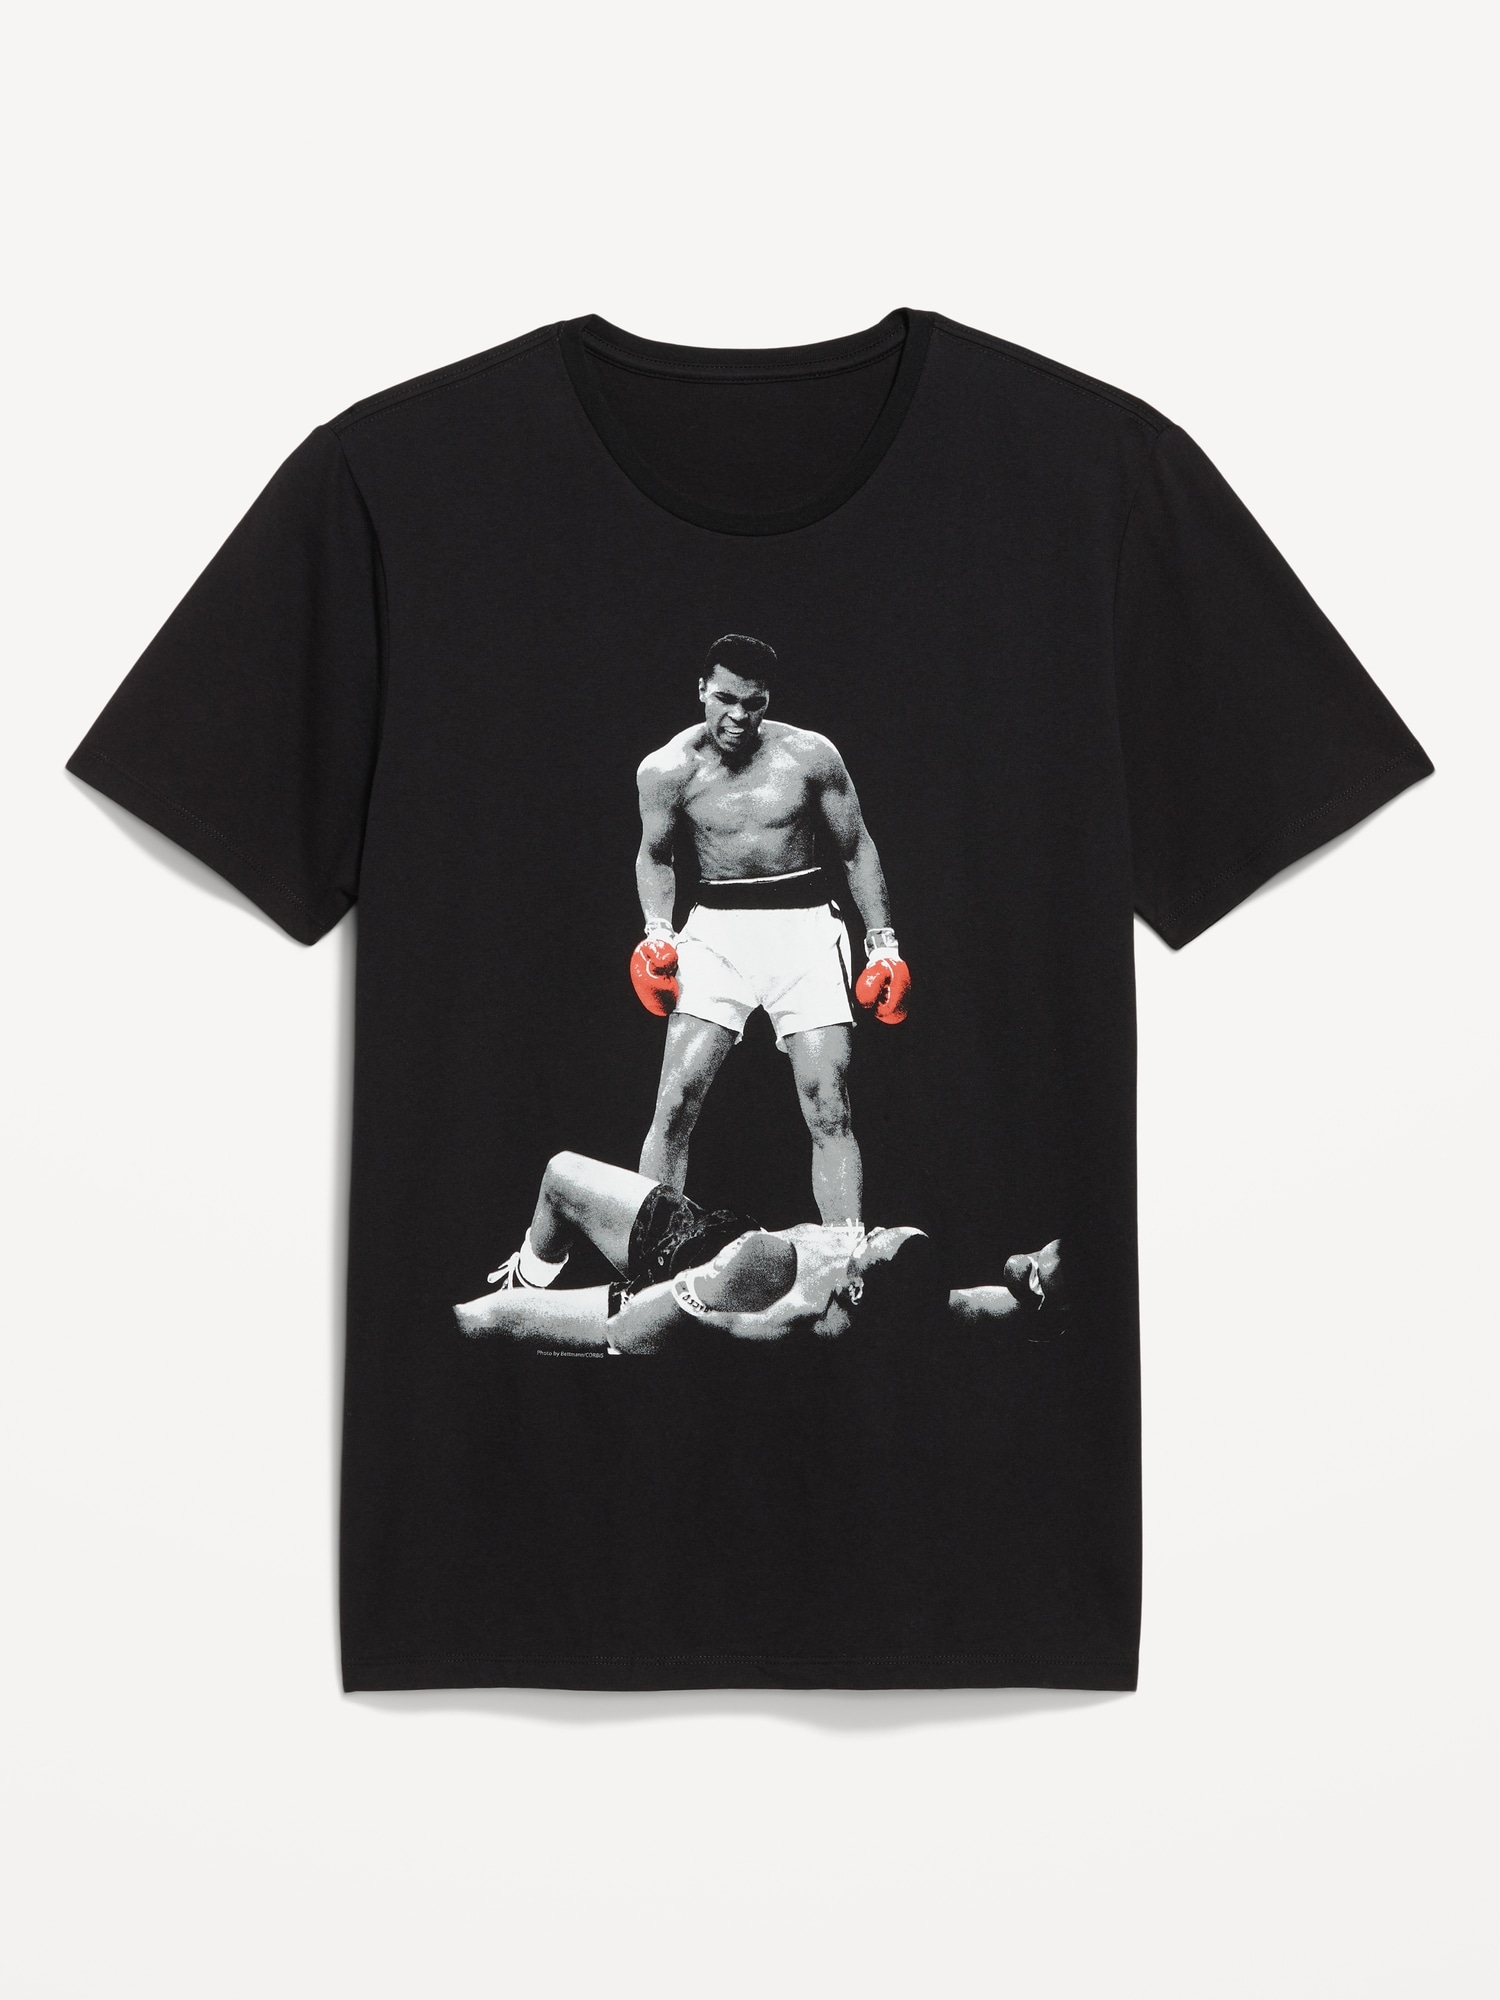 Muhammad Ali™ Gender-Neutral T-Shirt for Adults